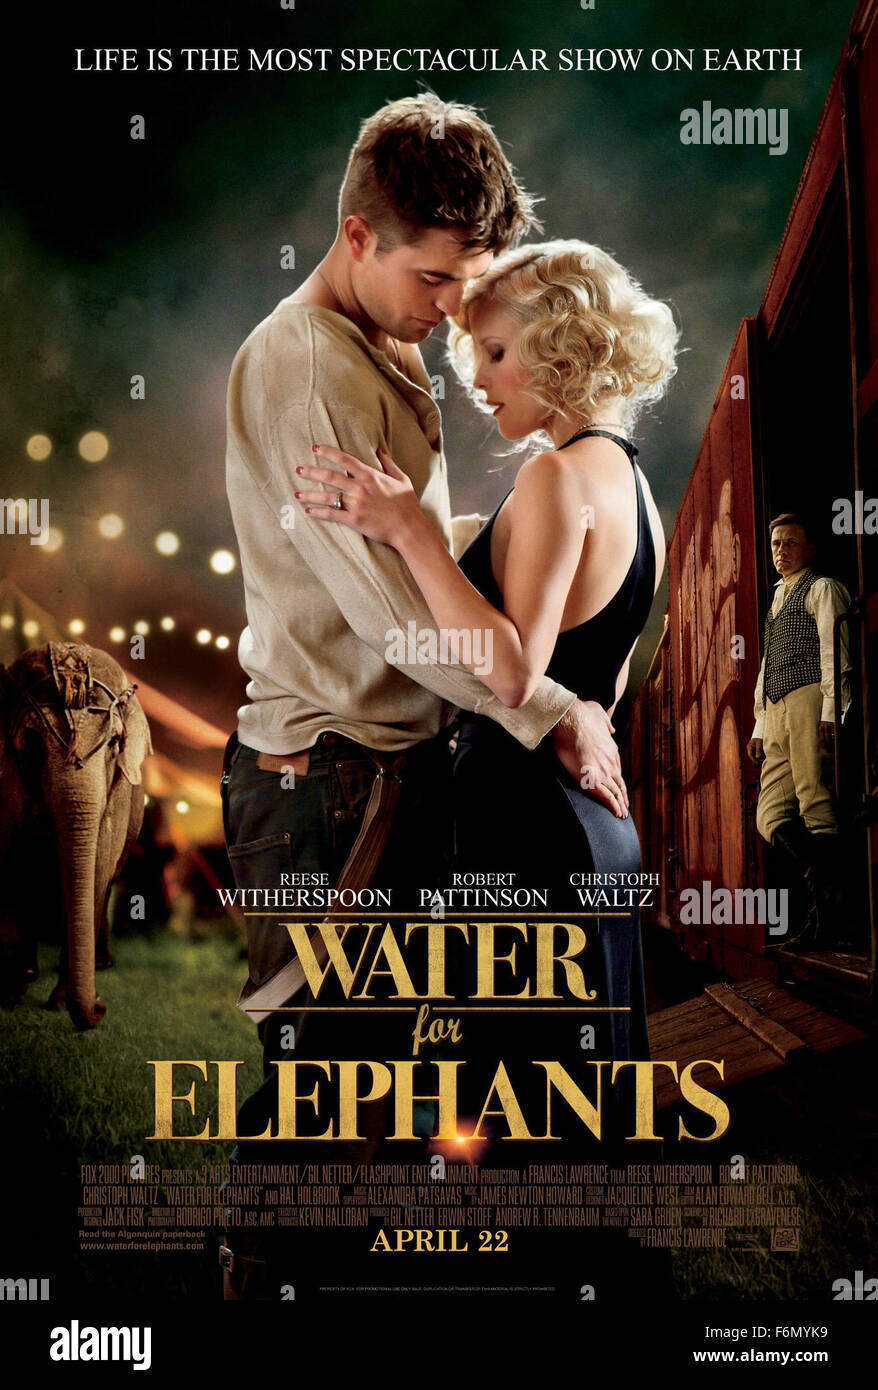 RELEASE DATE: April 22, 2011  MOVIE TITLE: Water for Elephants  STUDIO: 3 Arts Entertainment  DIRECTOR: Francis Lawrence  PLOT: A veterinary student abandons his studies after his parents are killed and joins a traveling circus as their vet  PICTURED: REESE WITHERSPOON as Marlena Rosenbluth, ROBERT PATTINSON as Jacob Jankowski  (Credit Image: c 3 Arts Entertainment/Entertainment Pictures) Stock Photo